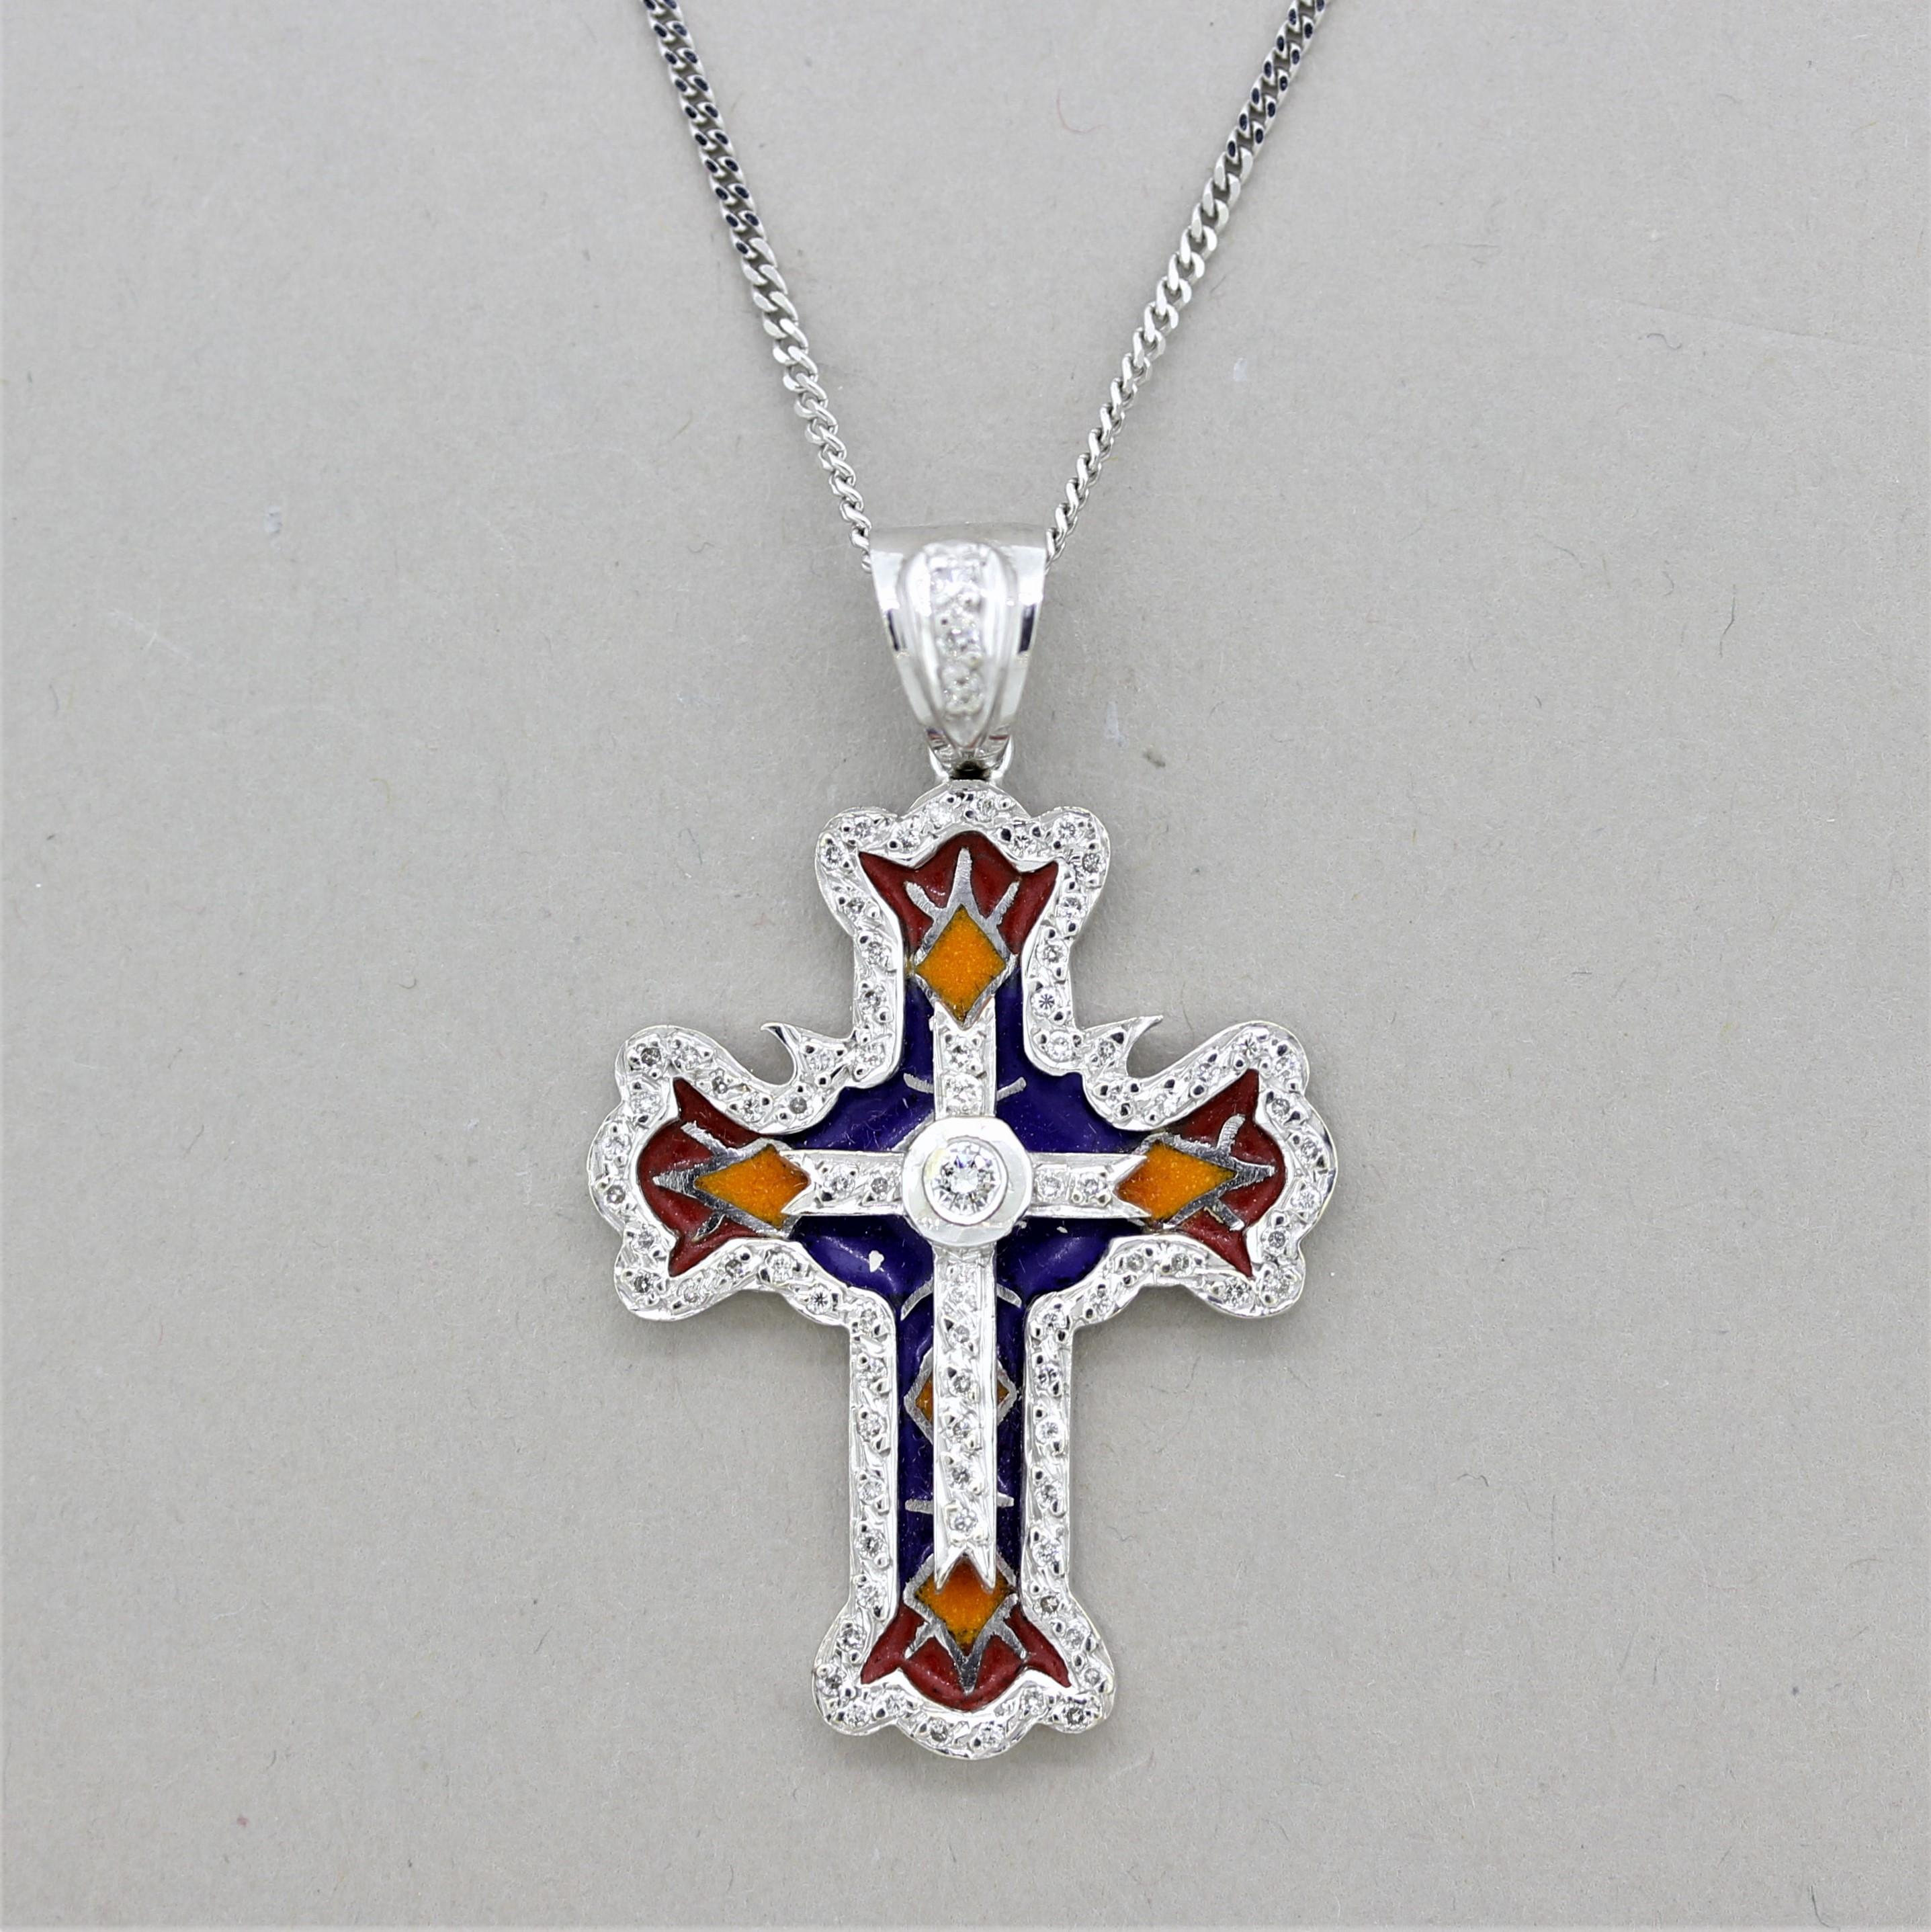 A marvelously unique and beautiful cross pendant featuring 0.56 carats of round brilliant-cut diamonds along with detailed and colorful enamel. The enamel is applied in empty cells instead of over metal which allows light to go through the enamel